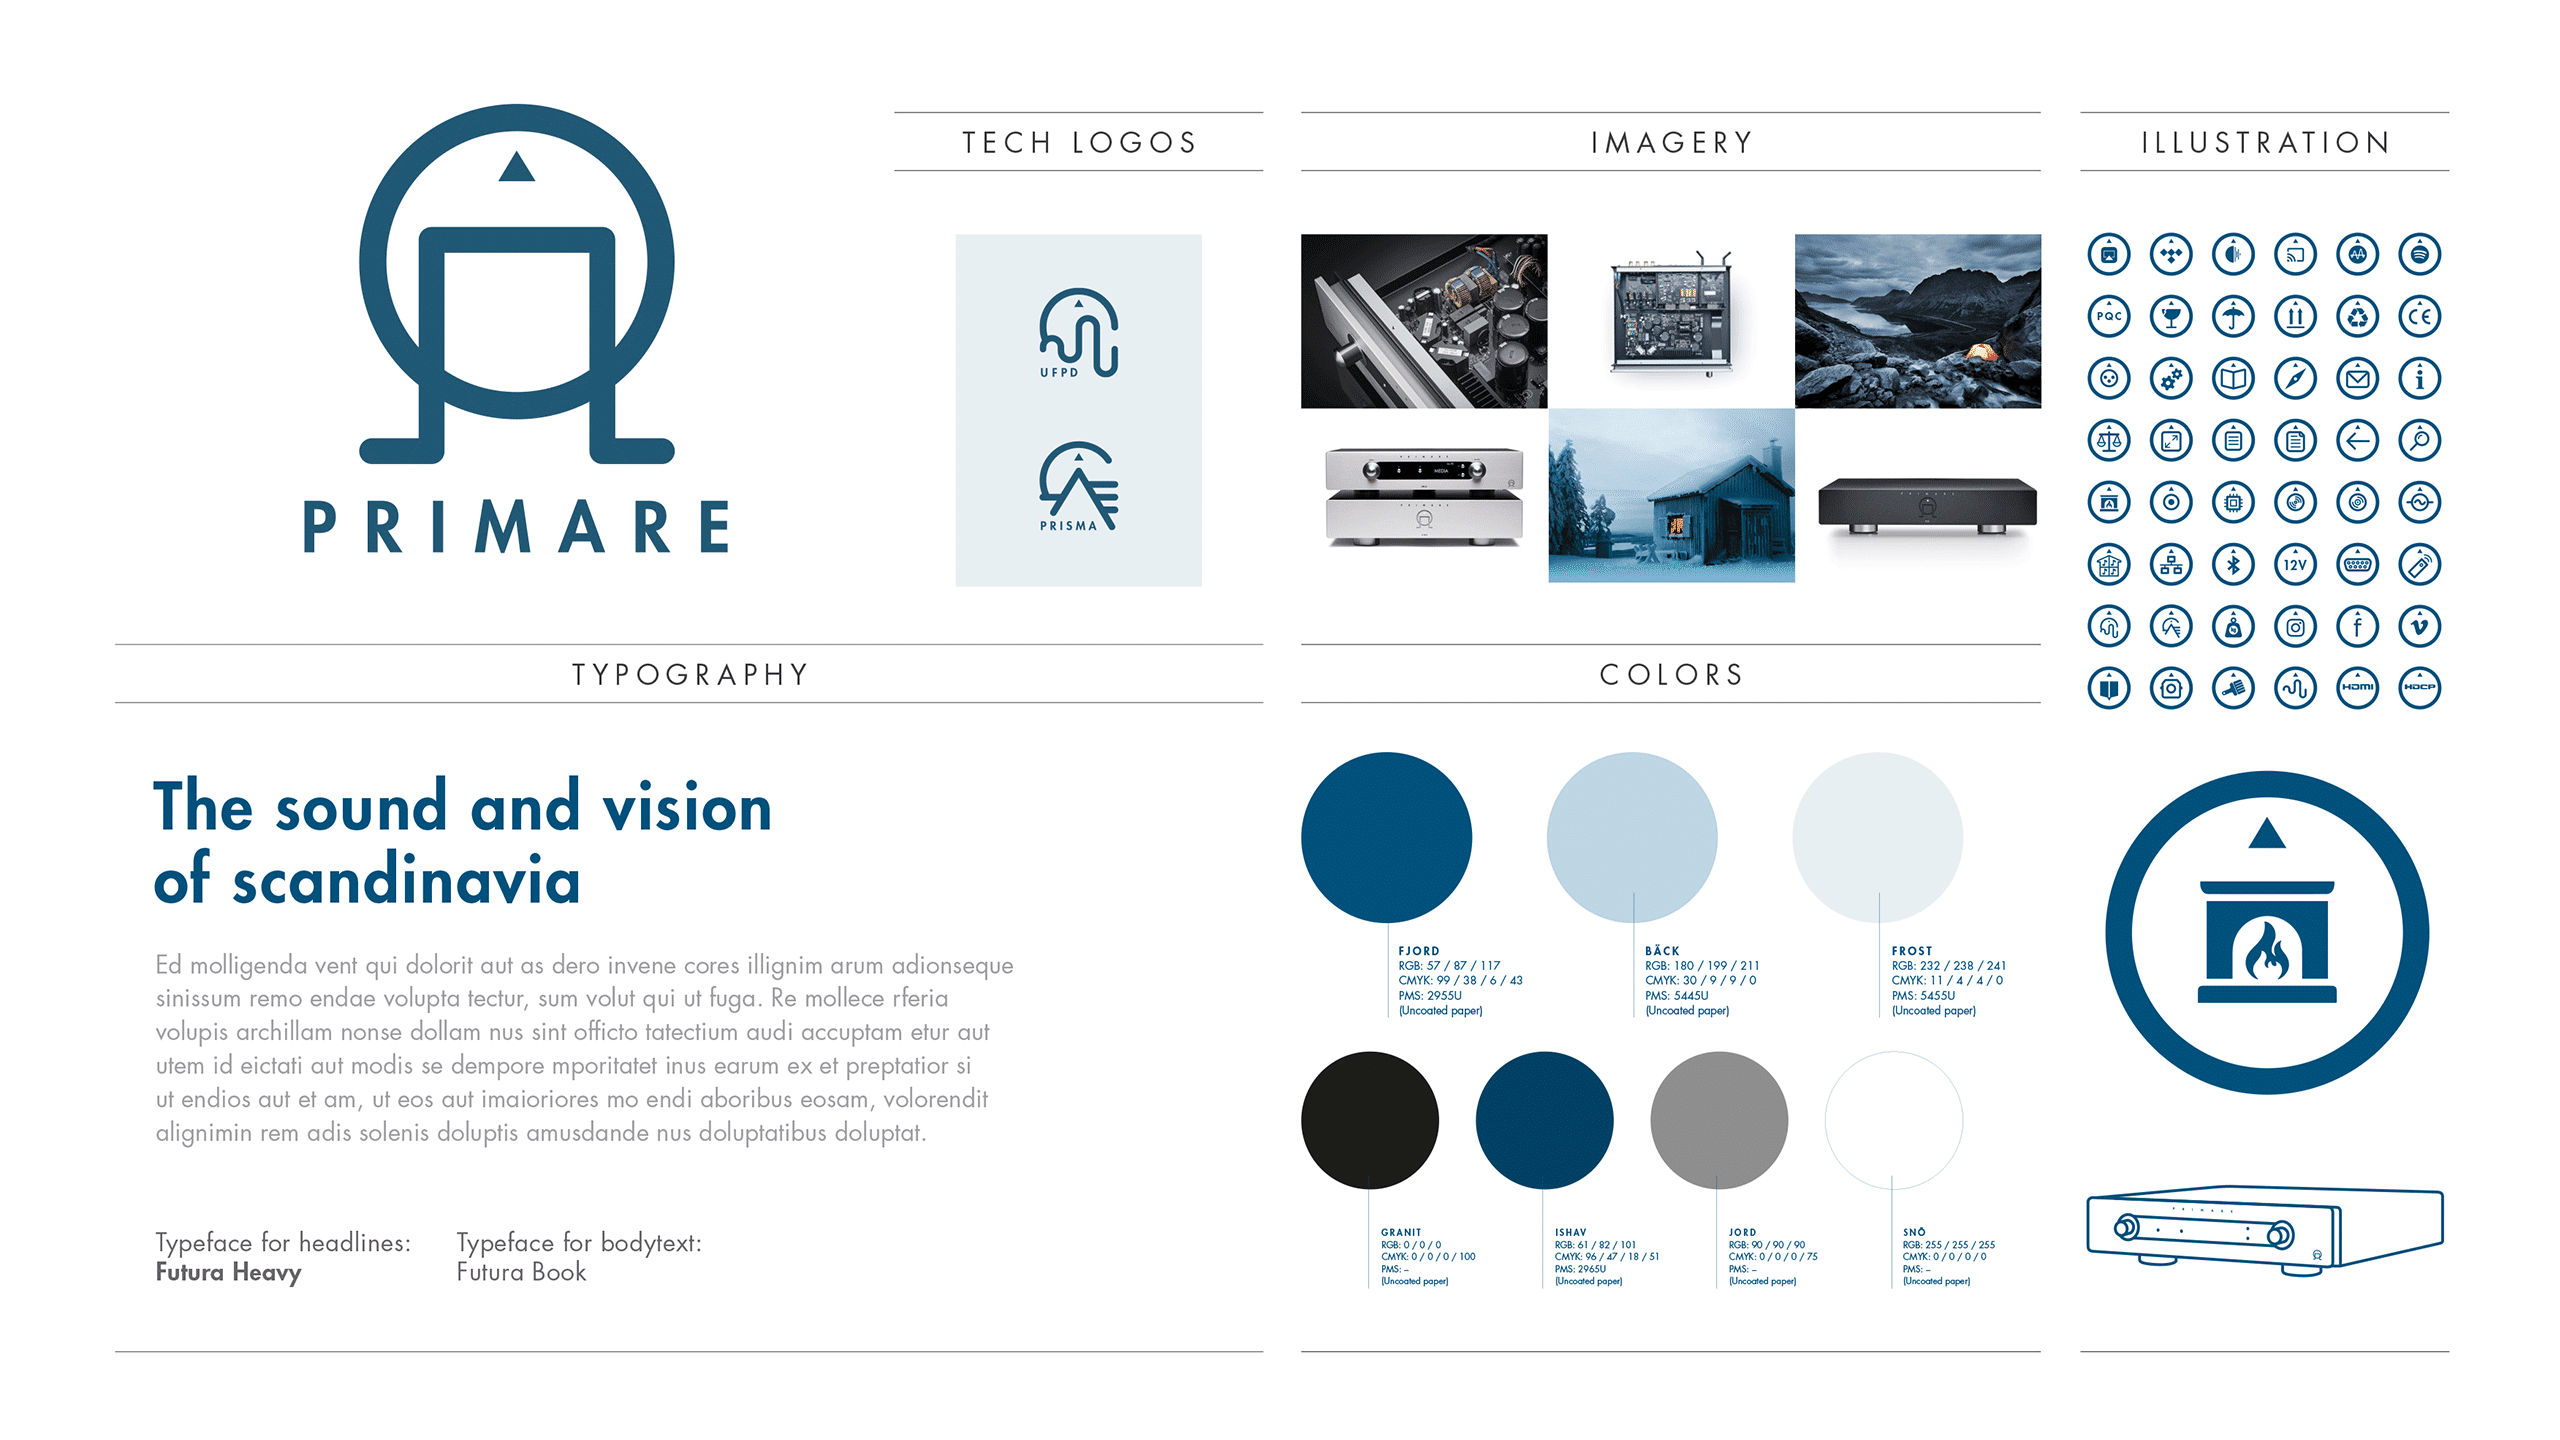 Visual identity overview for Primare